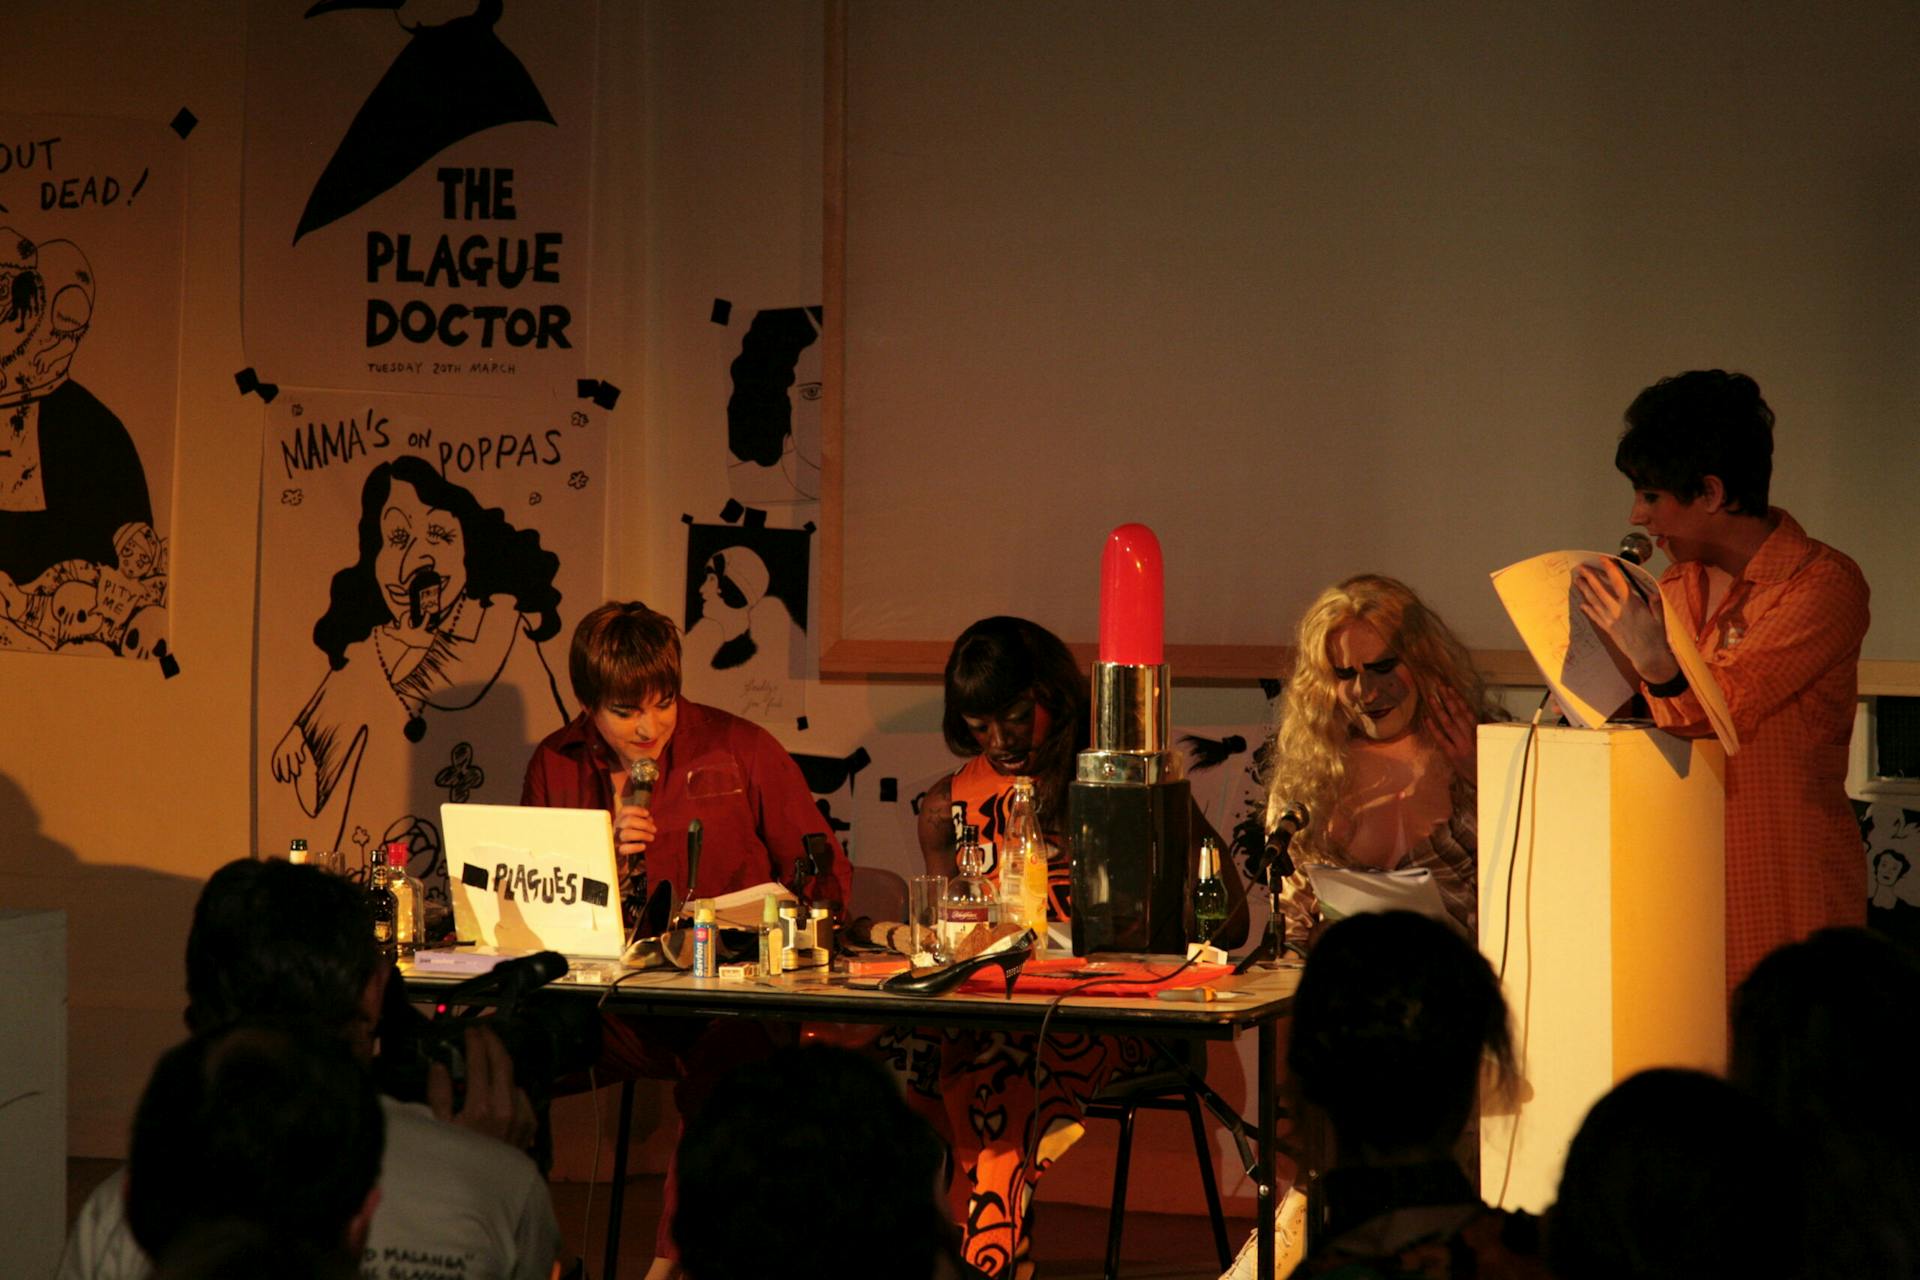 Four costumed performers sit at a table in front of an audience. The table has a giant novelty red lipstick, a high heel and a laptop. The wall in the background is plastered with black and white illustrated posters